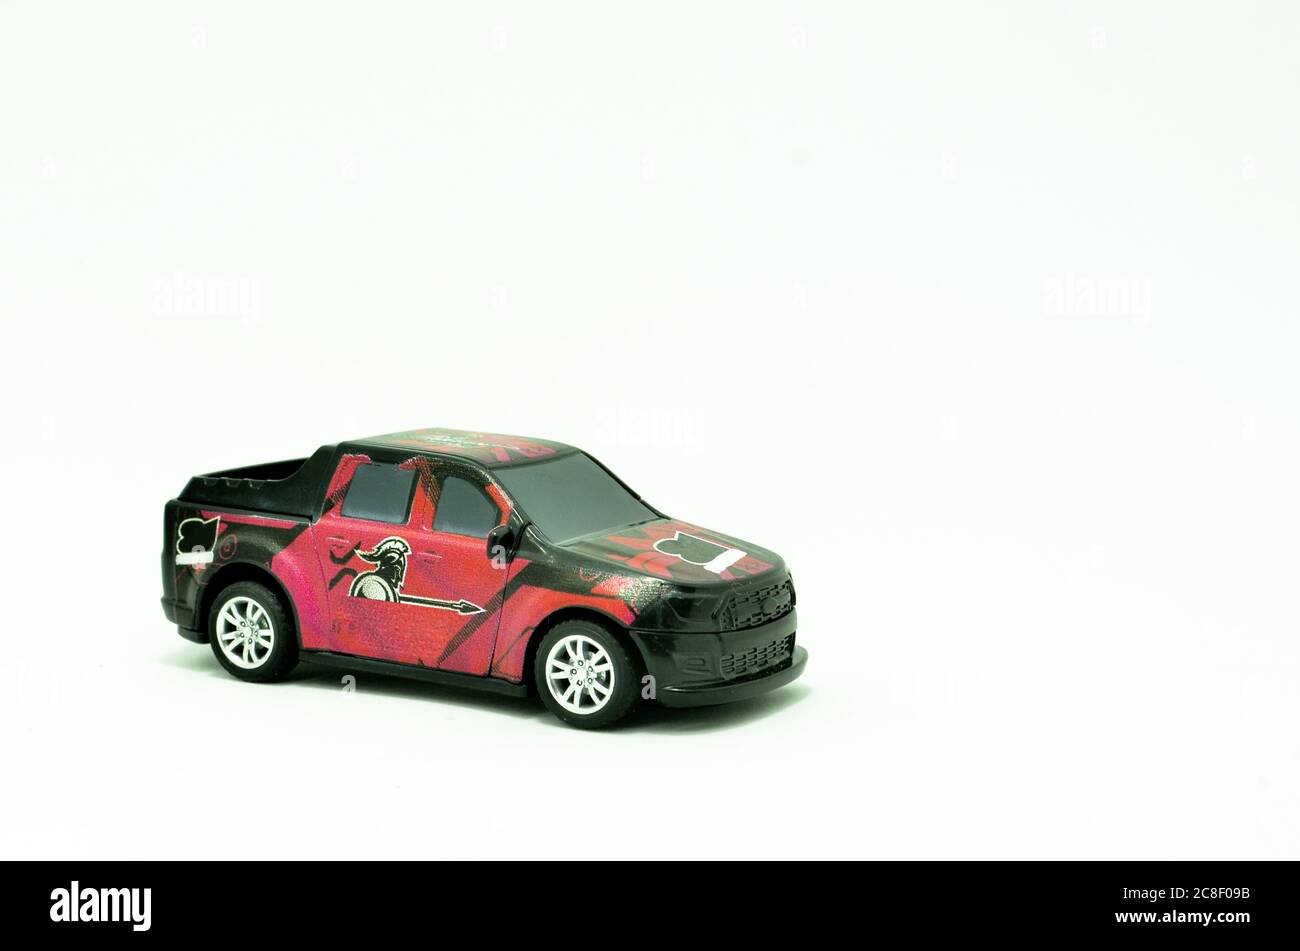 Red and black  Plastic Toy Car Isolated on White Background Stock Photo